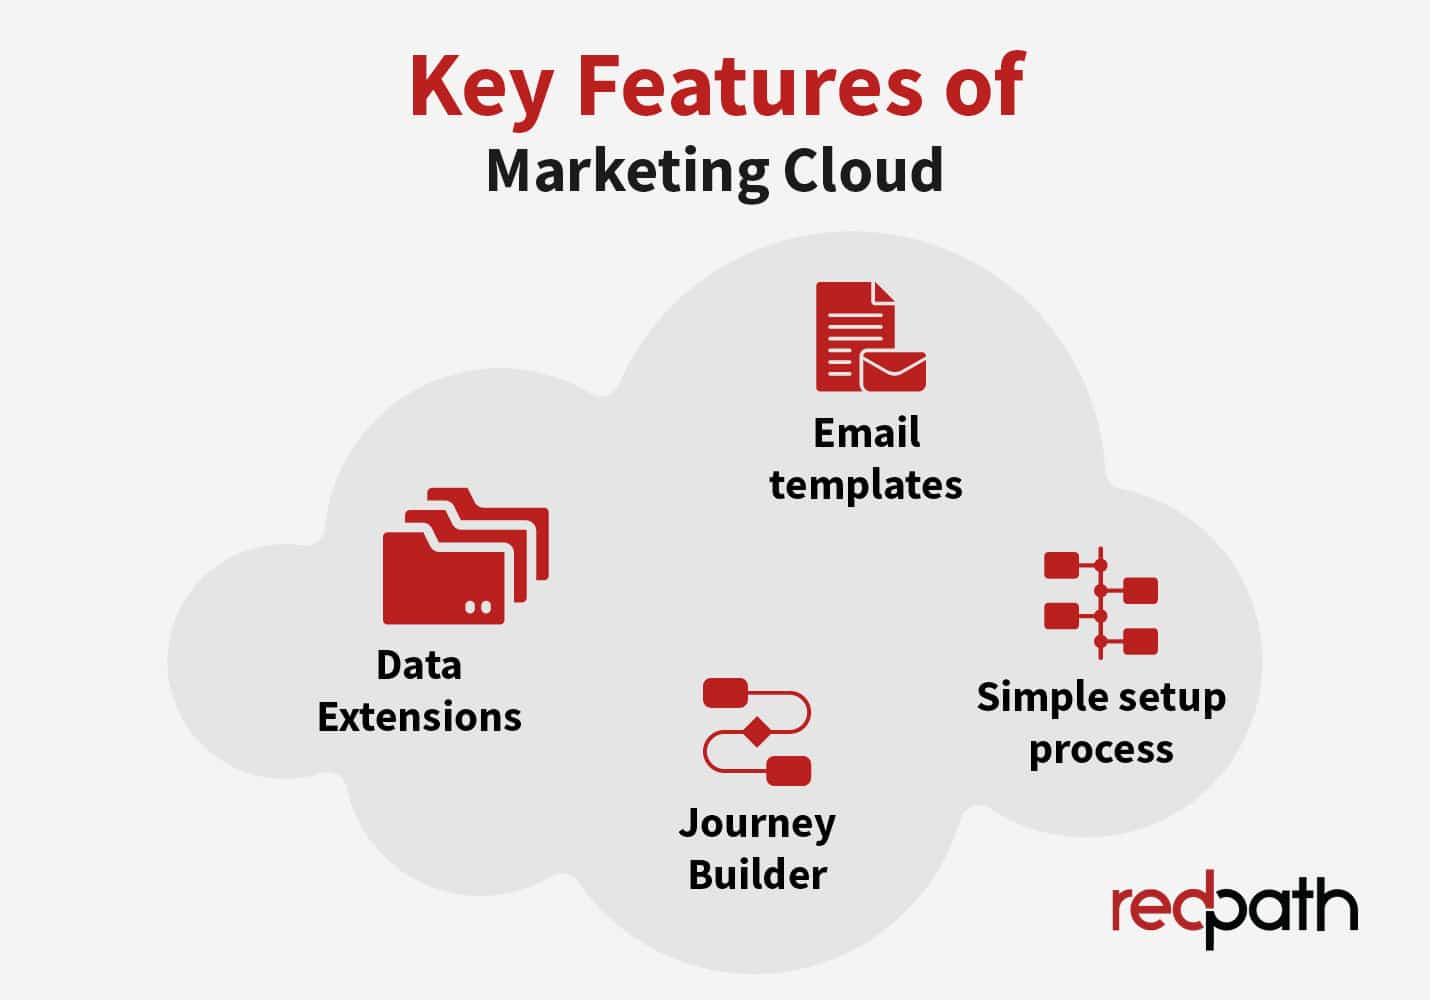 This infographic and the text below showcase the key features of Marketing Cloud for nonprofits.